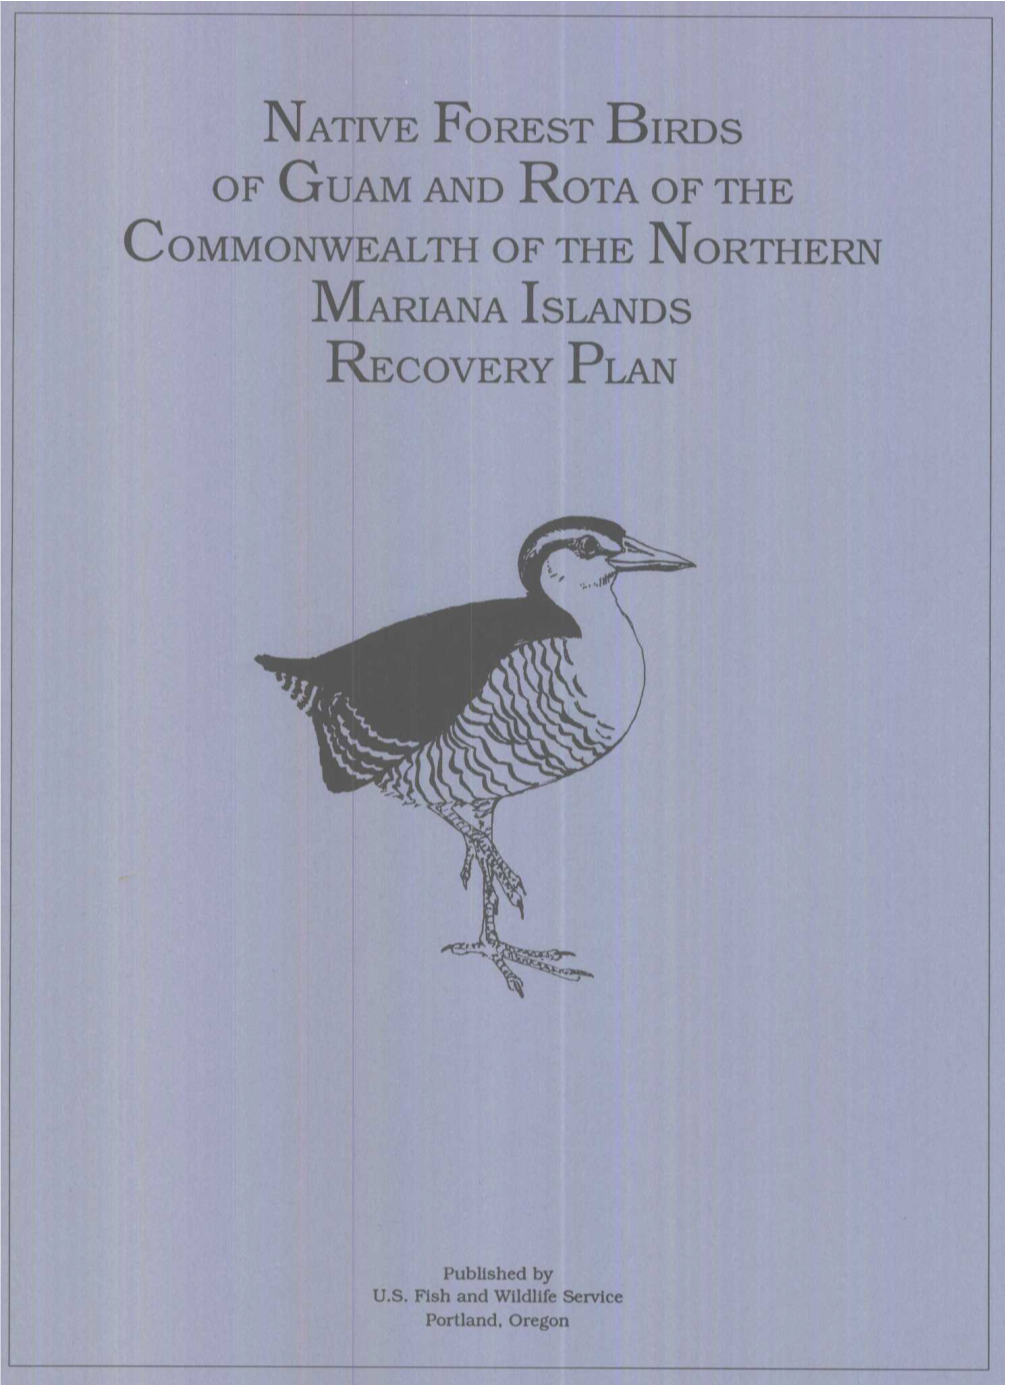 Native Forest Birds of Guam and Rota of the Commonwealth of the Norther1~ Mariana Islands Recovery Plan